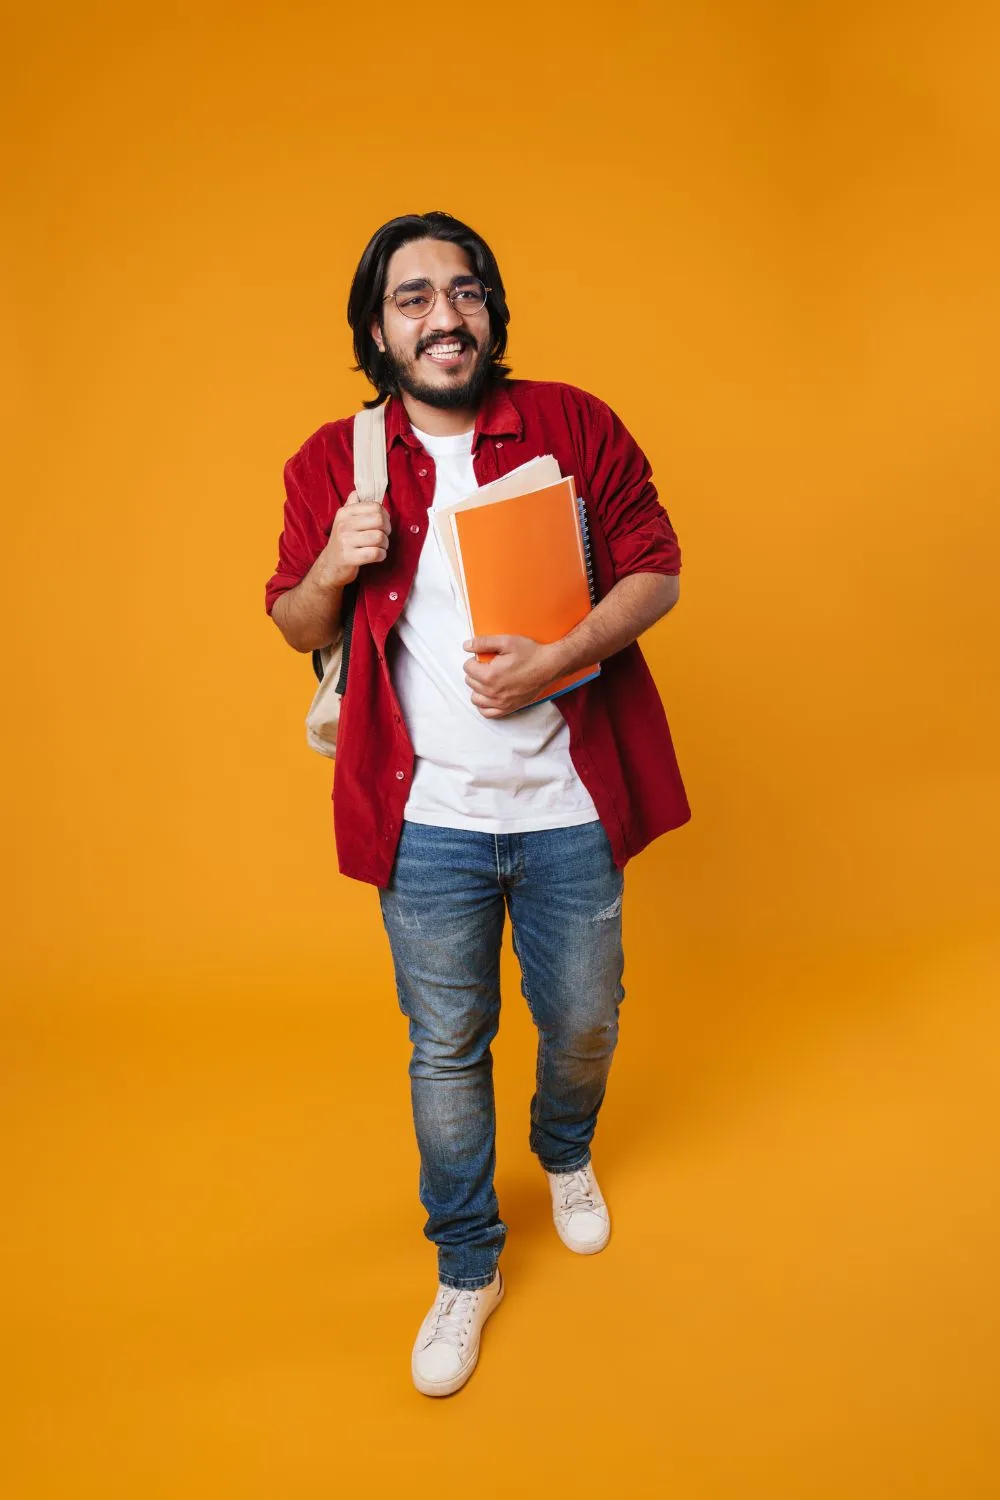 college boy all smiles as he held an orange notebook and carrying a backpack